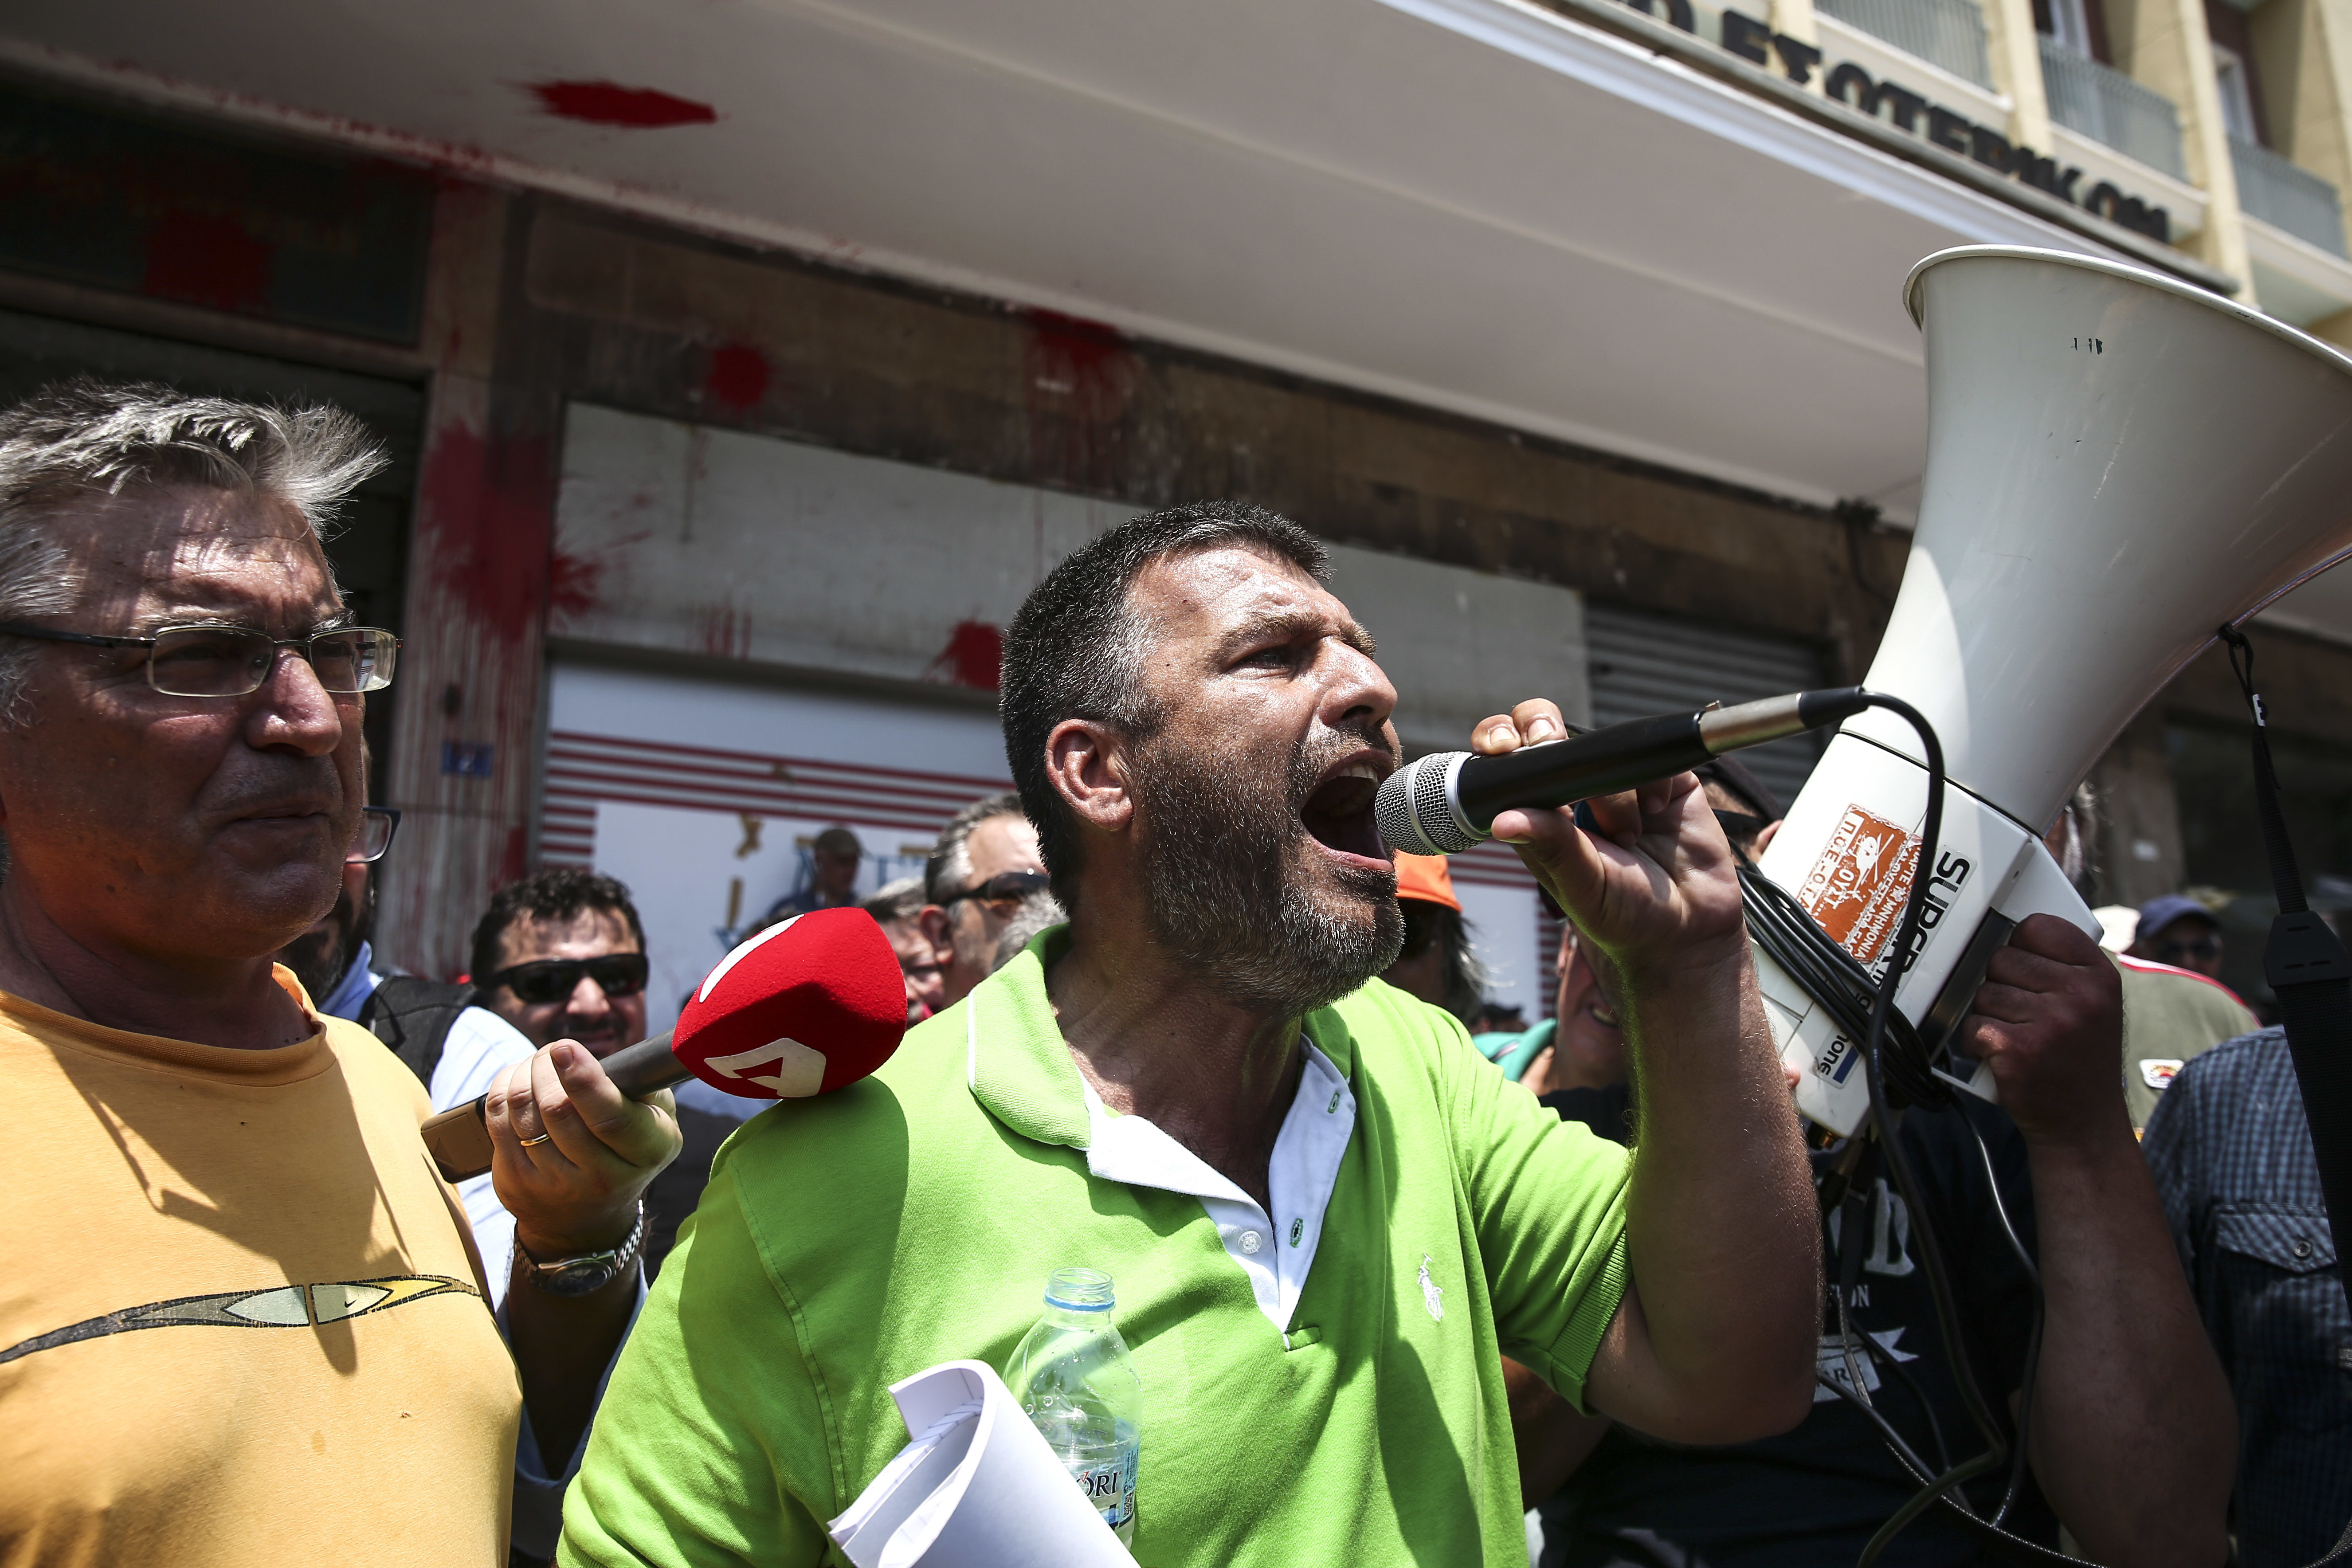 Nikos Trikas, leader of the municipal workers union, speaks to his colleagues during a rally outside the Interior Ministry in Athens, on Monday, June 26, 2017. With a heat wave expected later this week, Greece's government Monday urging striking garbage collectors to return to work after a 10-day protest has left huge piles of trash around Athens. (AP Photo/Yorgos Karahalis)